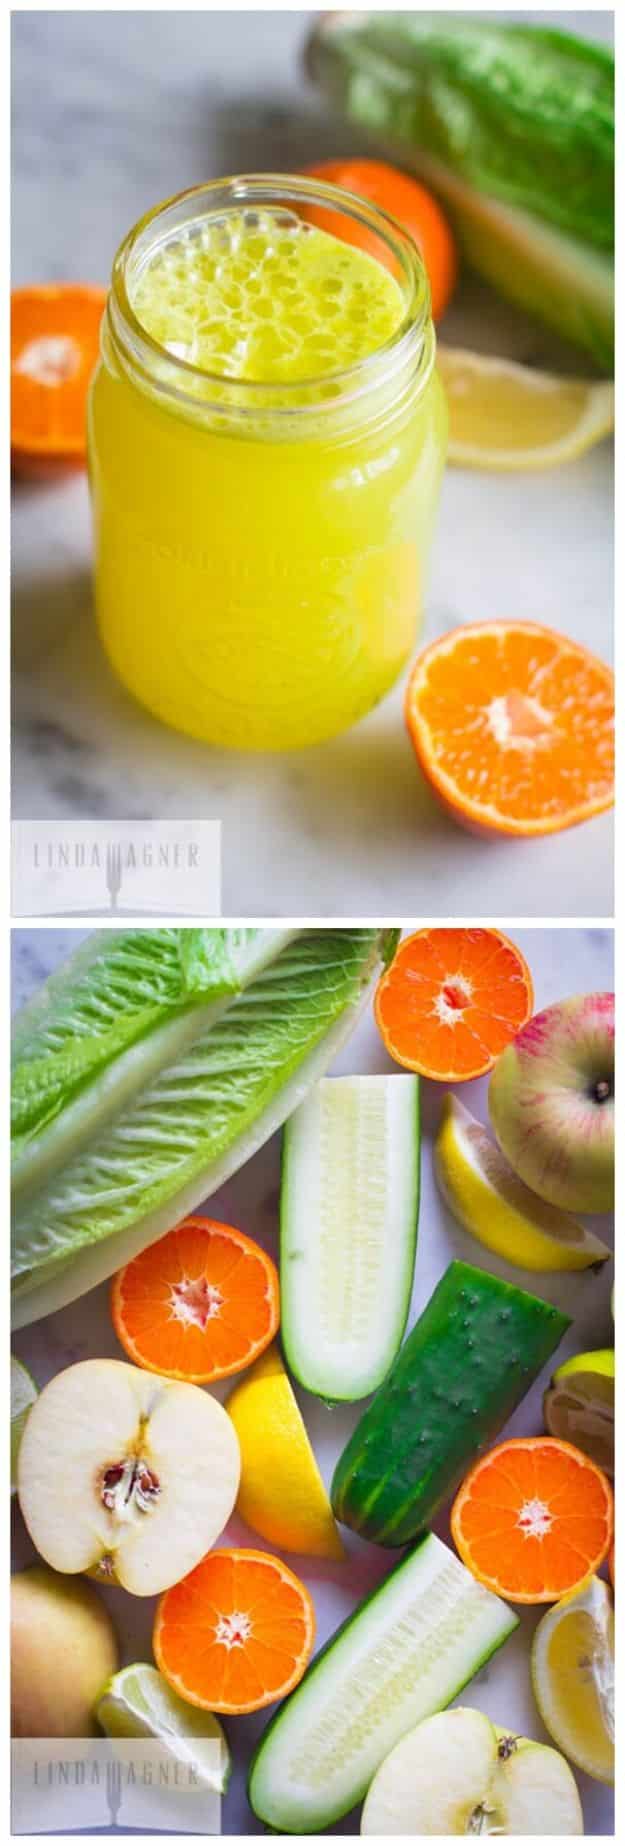 DIY Juice Recipes for Health, Detox and Energy - Belly Buster Green Juice - Juicing for Beginners With Fruit and Vegetables - Recipe Ideas and Mixes for Juices That Promote Weightloss, Help With Inflammation, For Cancer, For Skin, Cleanse and for Fat Burning - Try These for Kids, for Breakfast, Lunch and Post Workout 